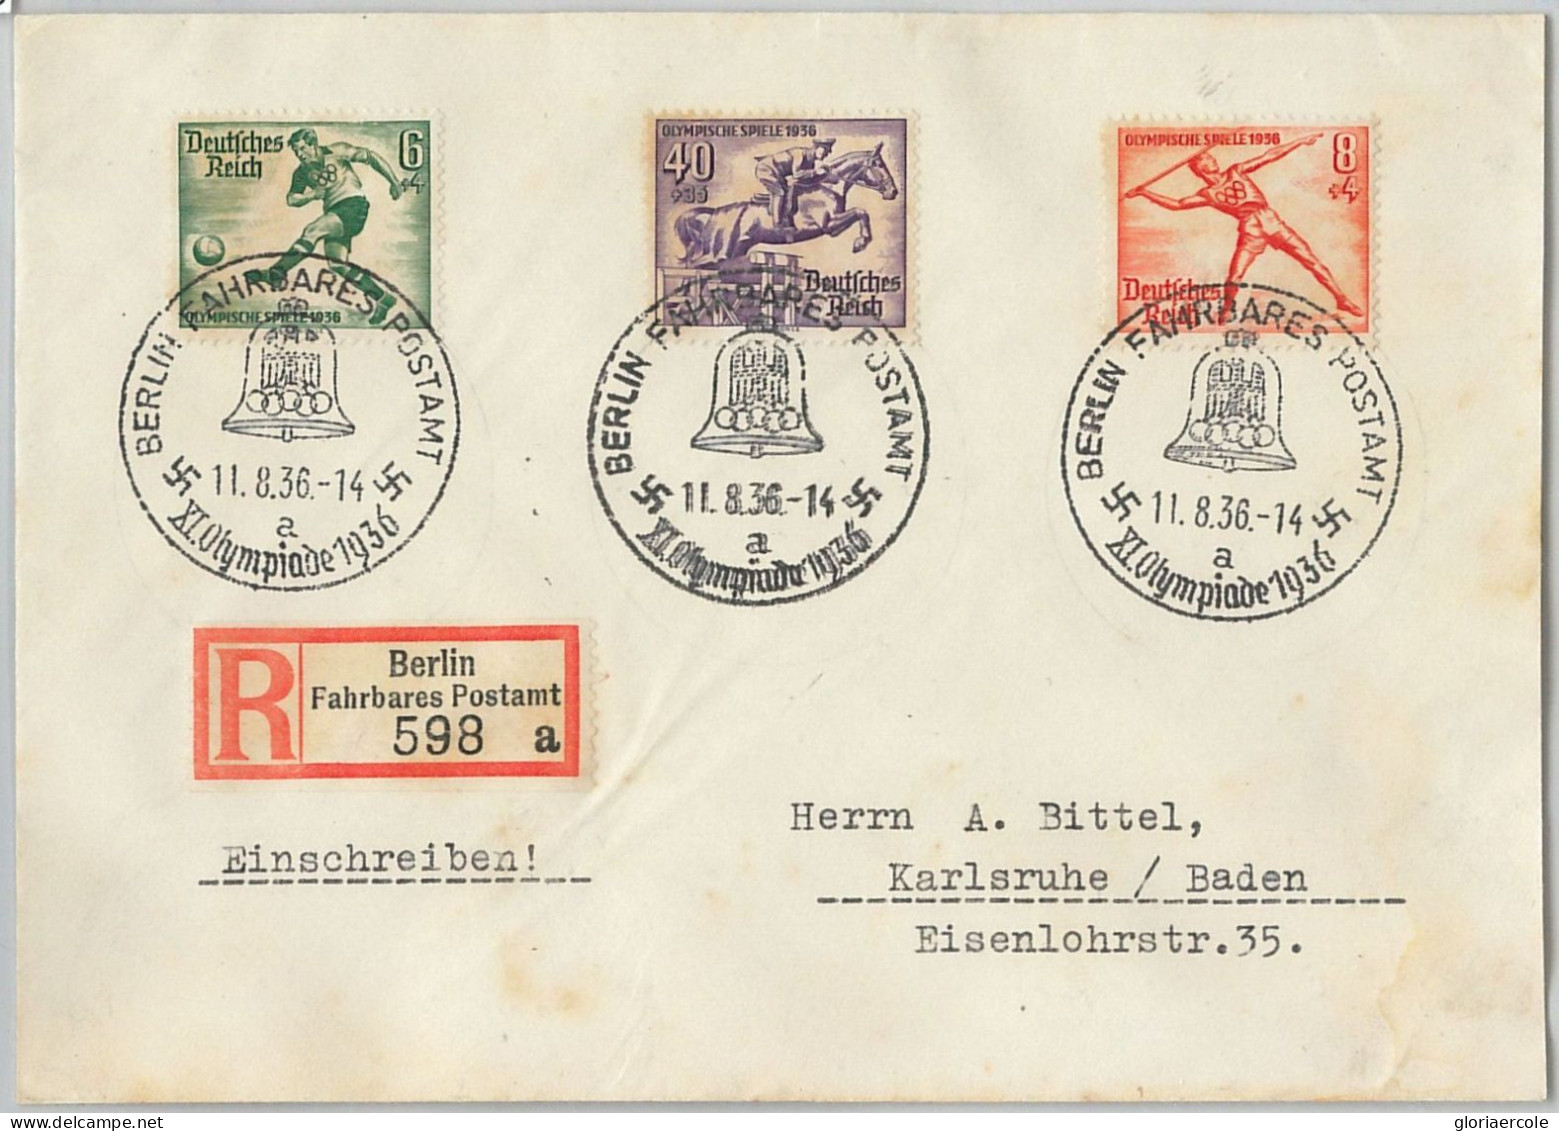 59953 - GERMANY - POSTAL HISTORY - REGISTERED COVER: OLYMPIC GAMES 1936 - Ete 1936: Berlin